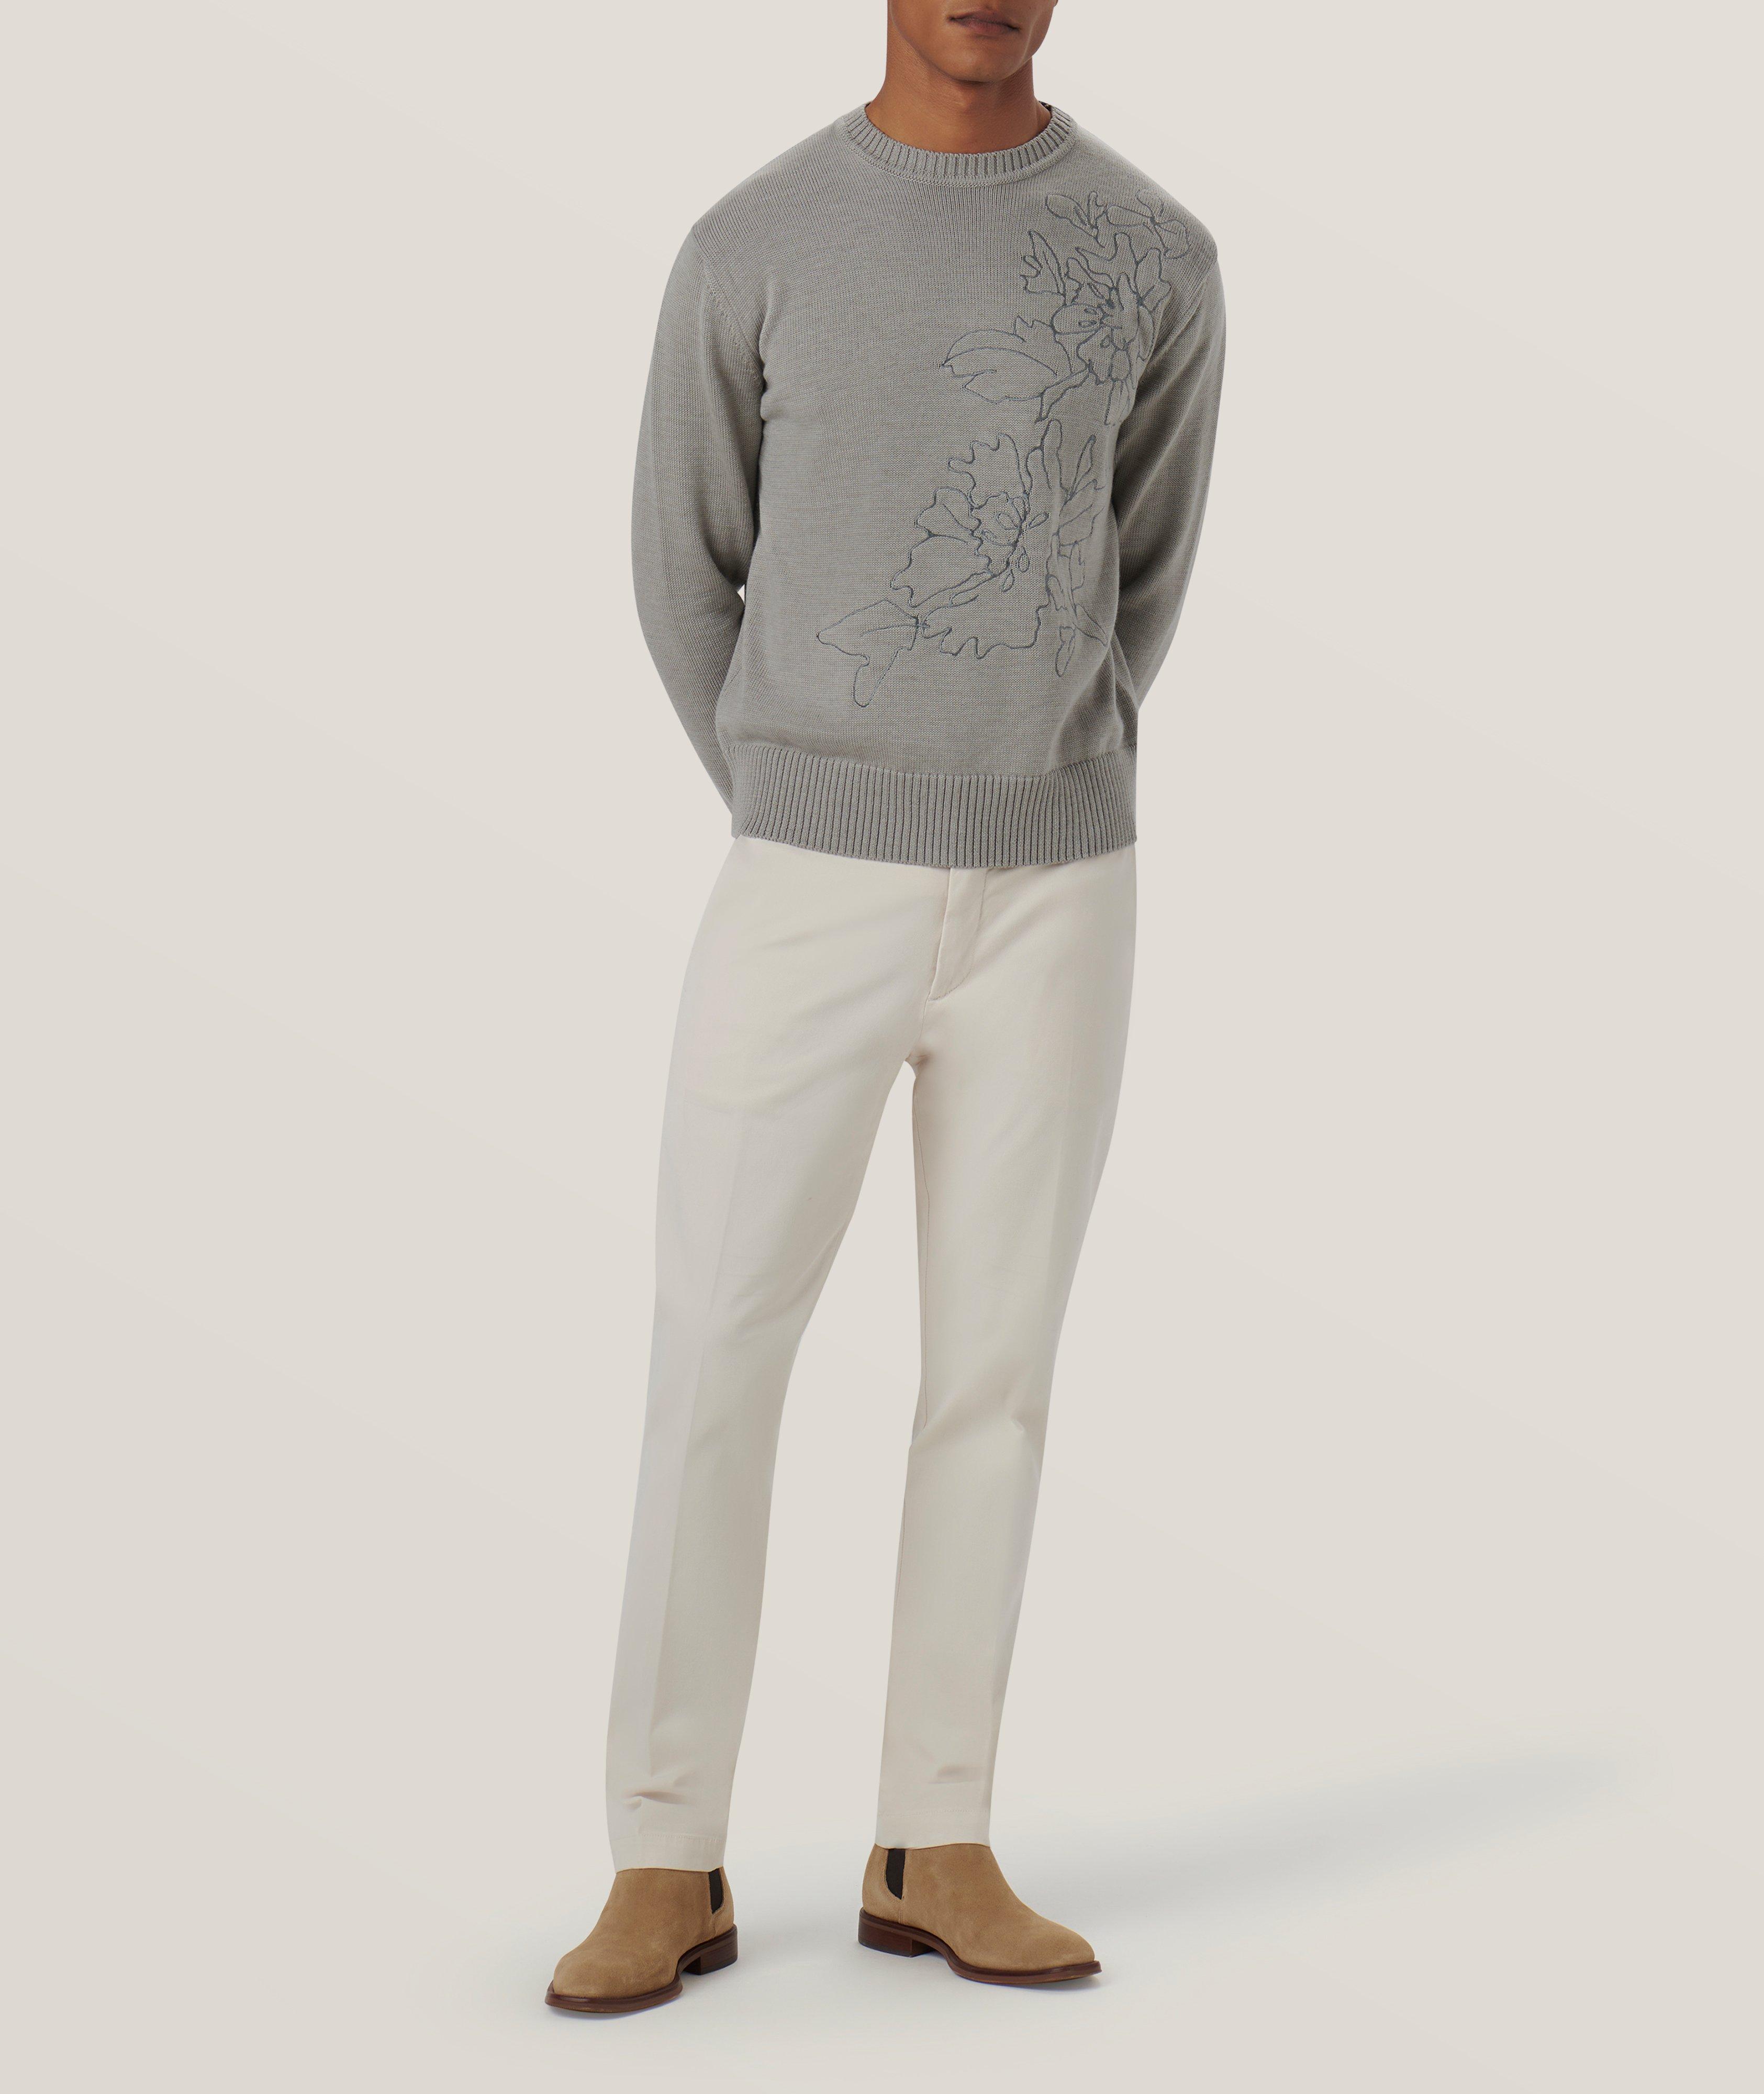 Floral Embroidered Merino Wool Sweater image 5